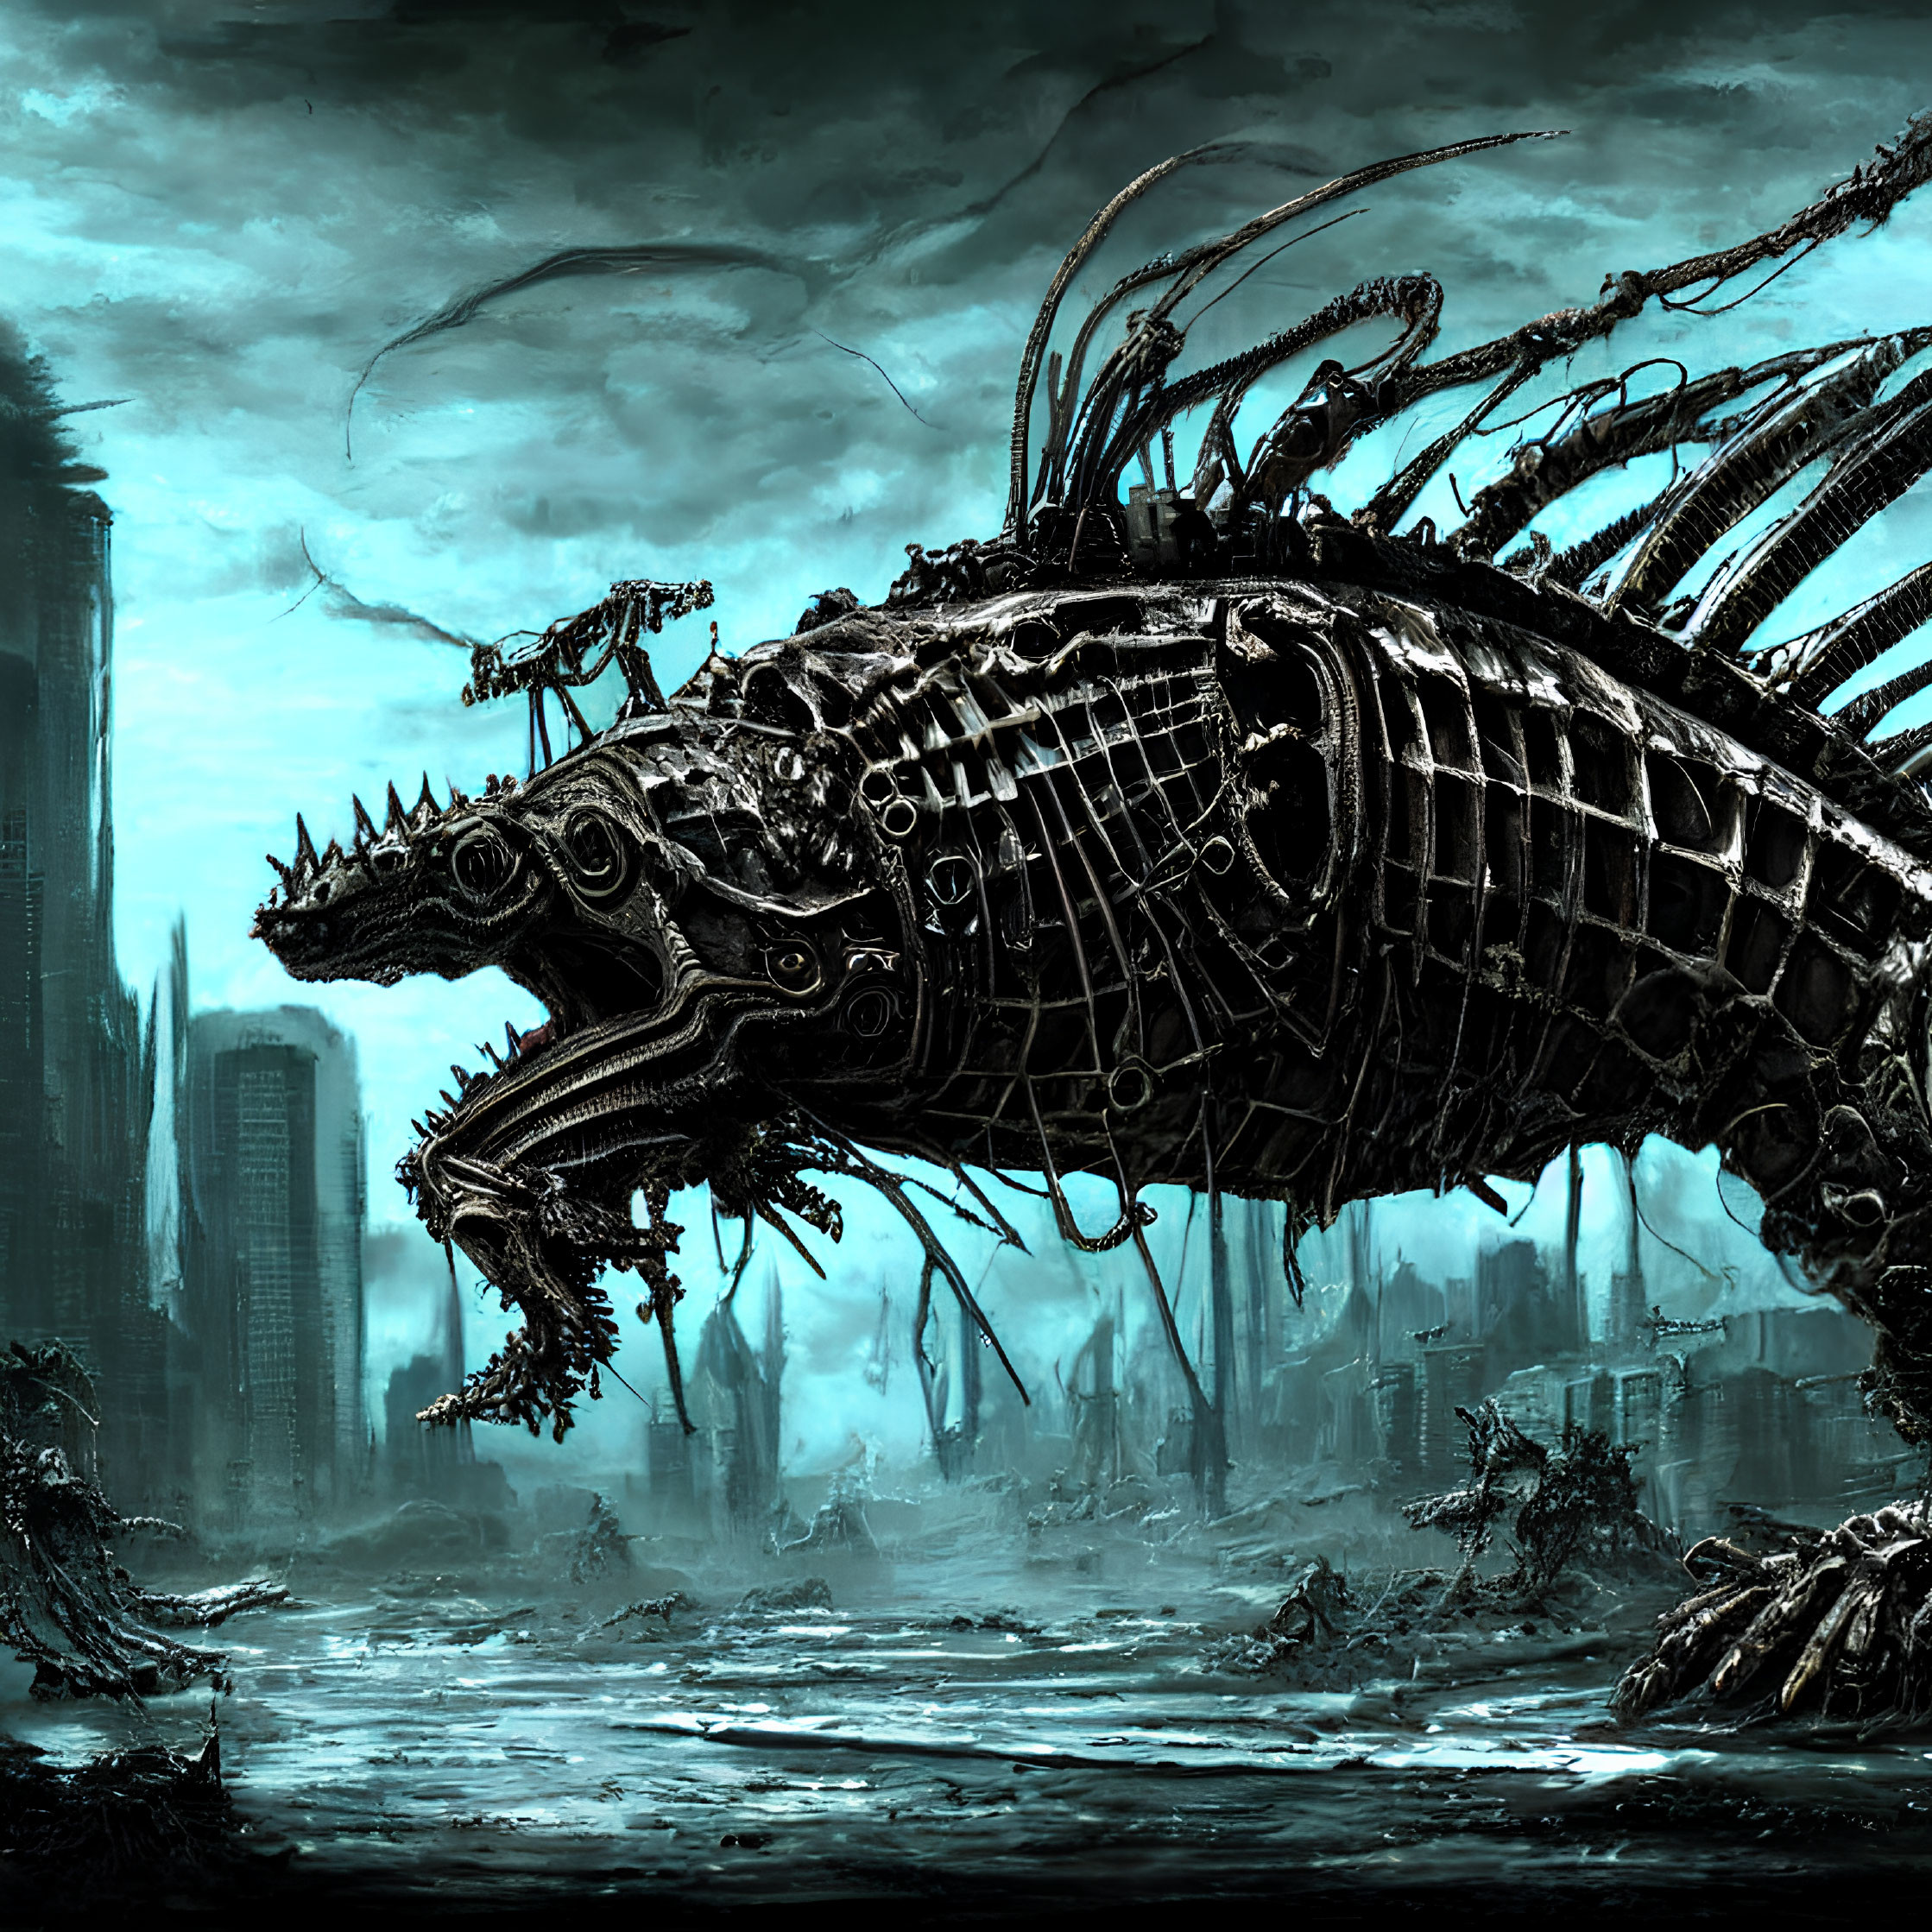 Enormous mechanical lizard in dystopian landscape with ruins.